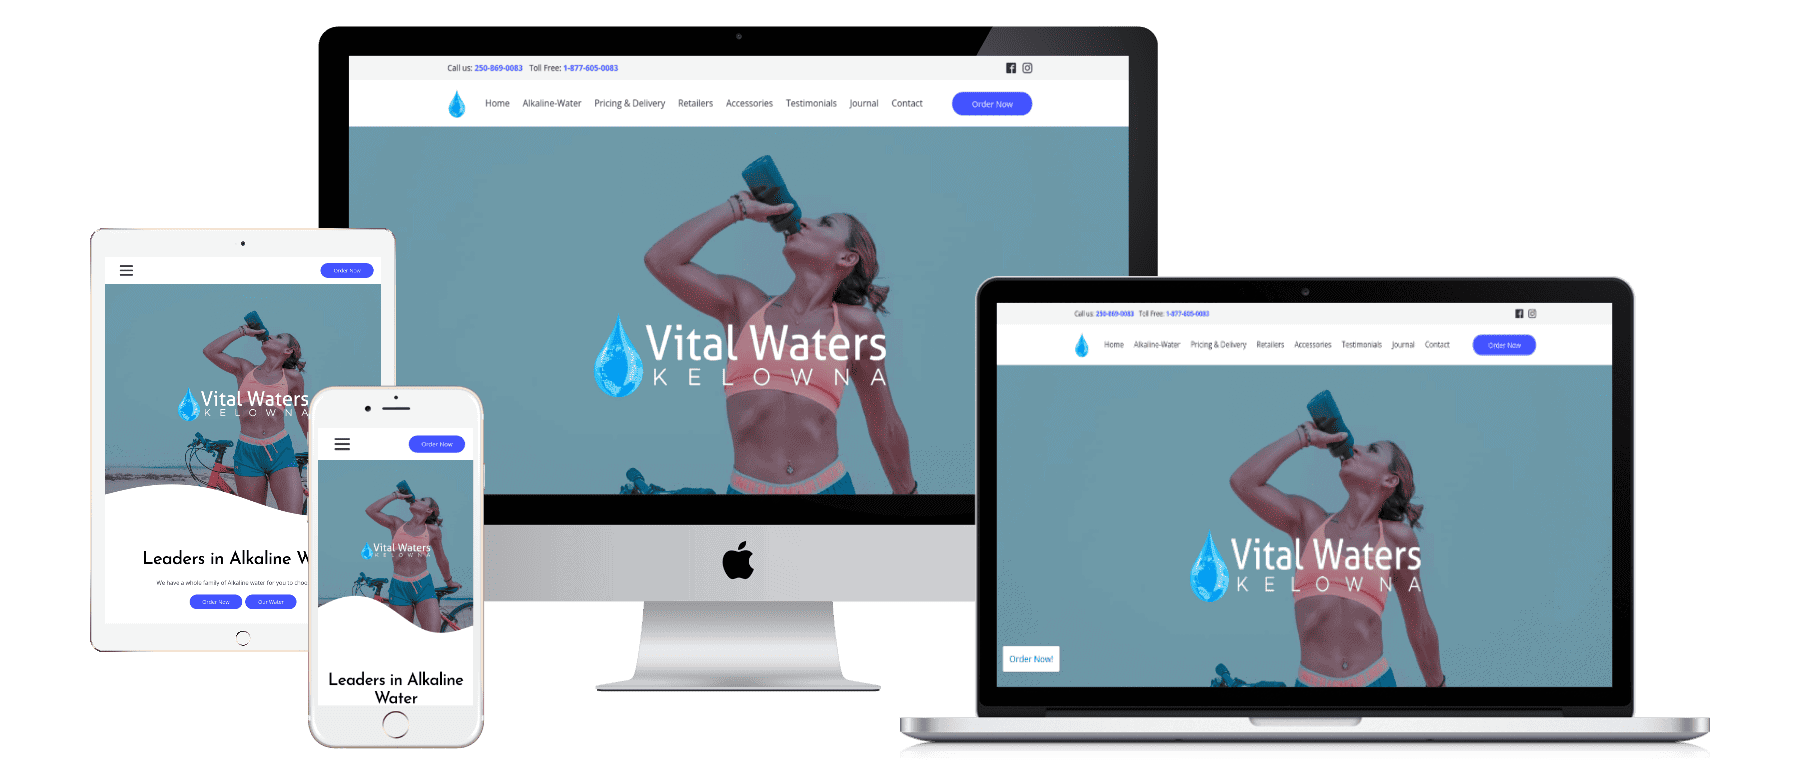 Small business website design in Kelowna with an image of woman drinking from a water bottle shown on multiple device screens